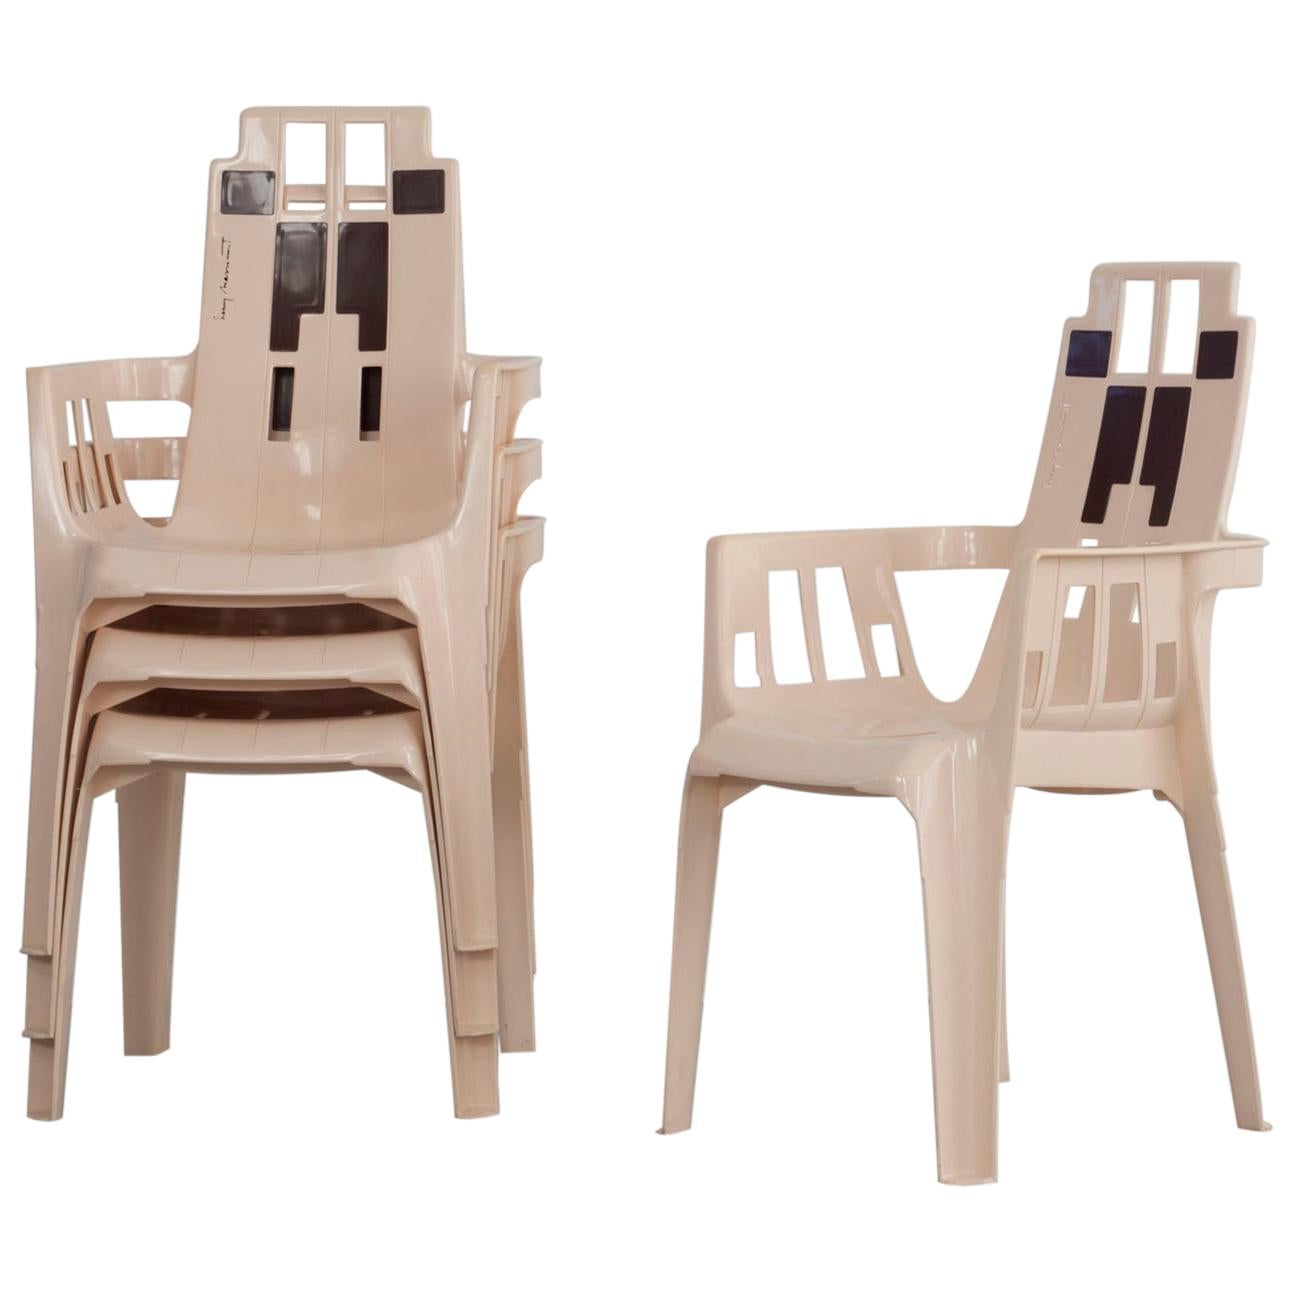 Set of 4 Stackable Plastic Chairs by Pierre Paulin for Henry Massonnet